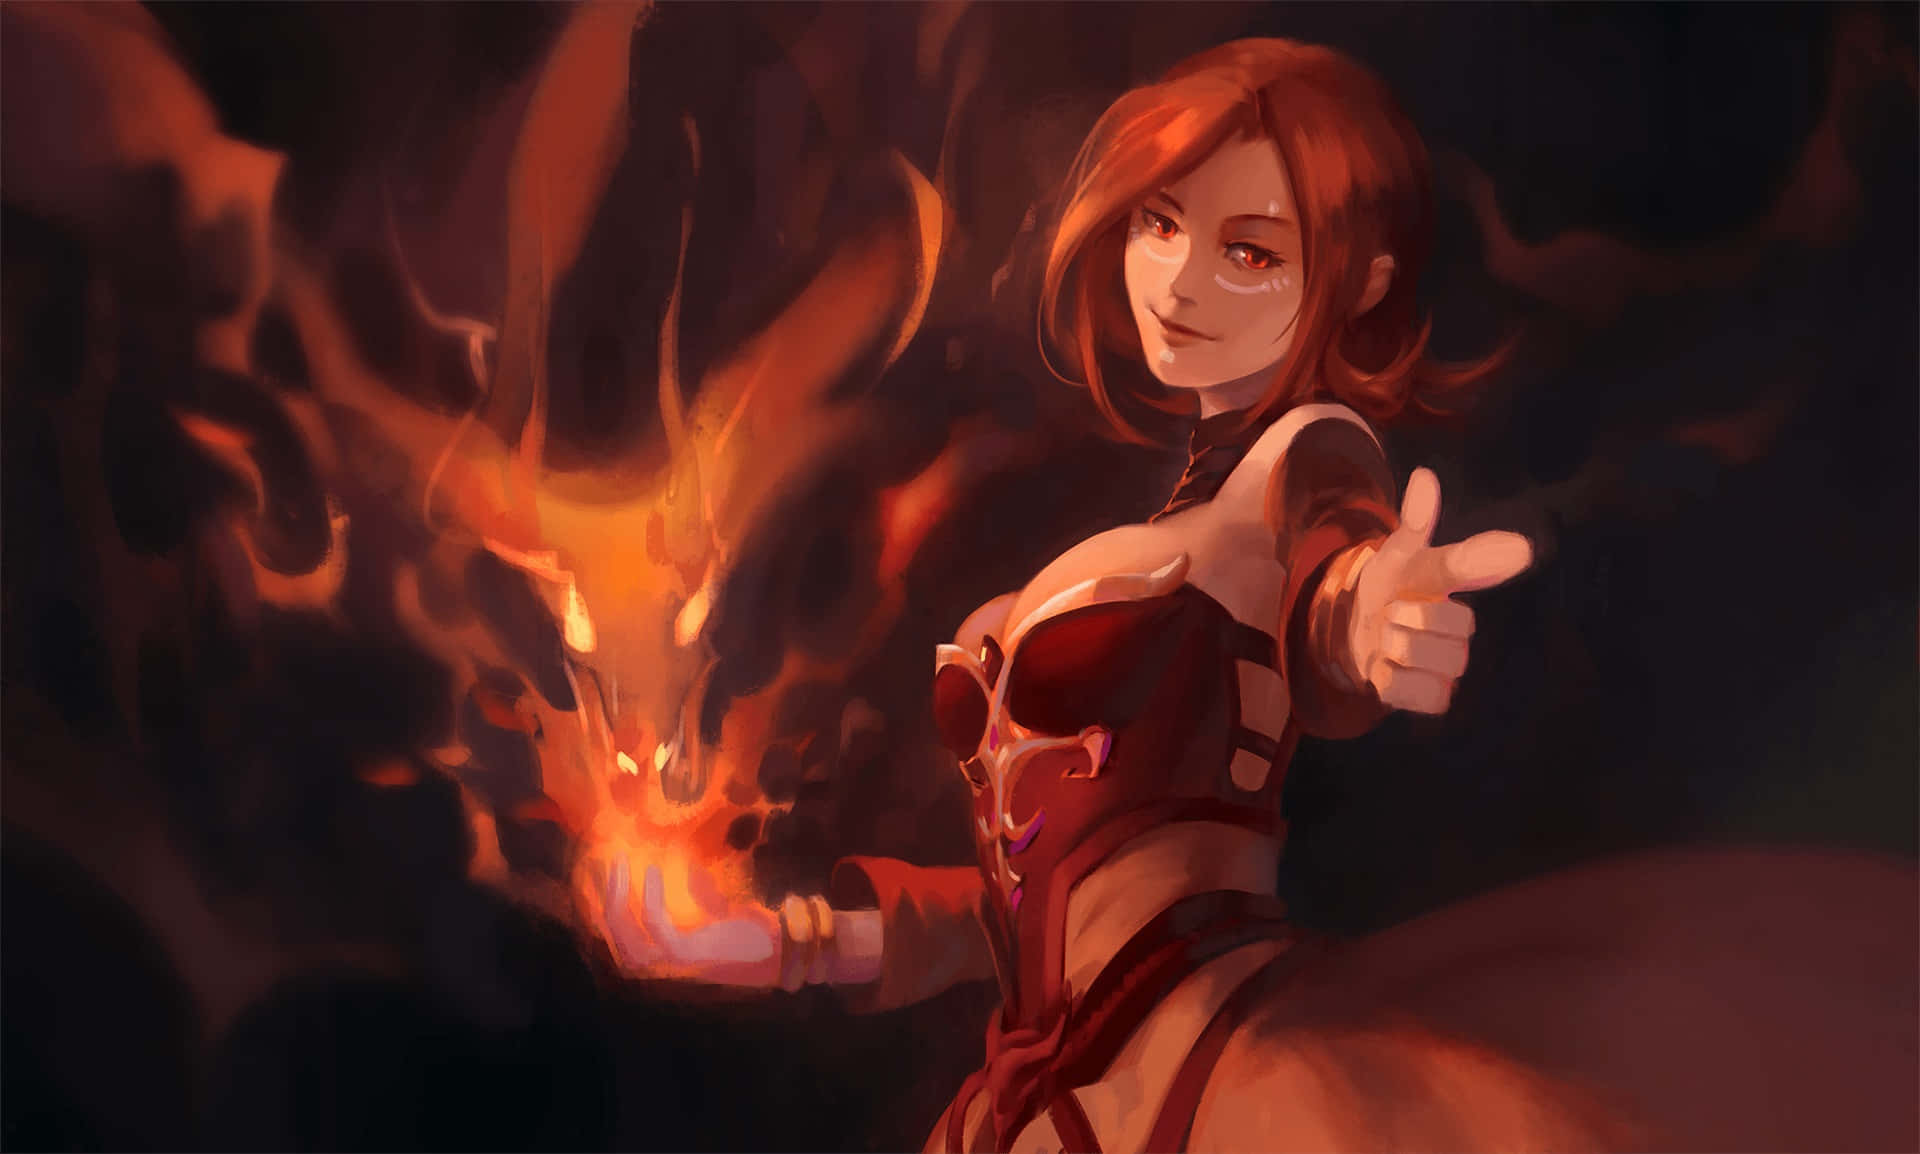 Captivating Lina in action: Harnessing the power of fire in Dota 2 Wallpaper